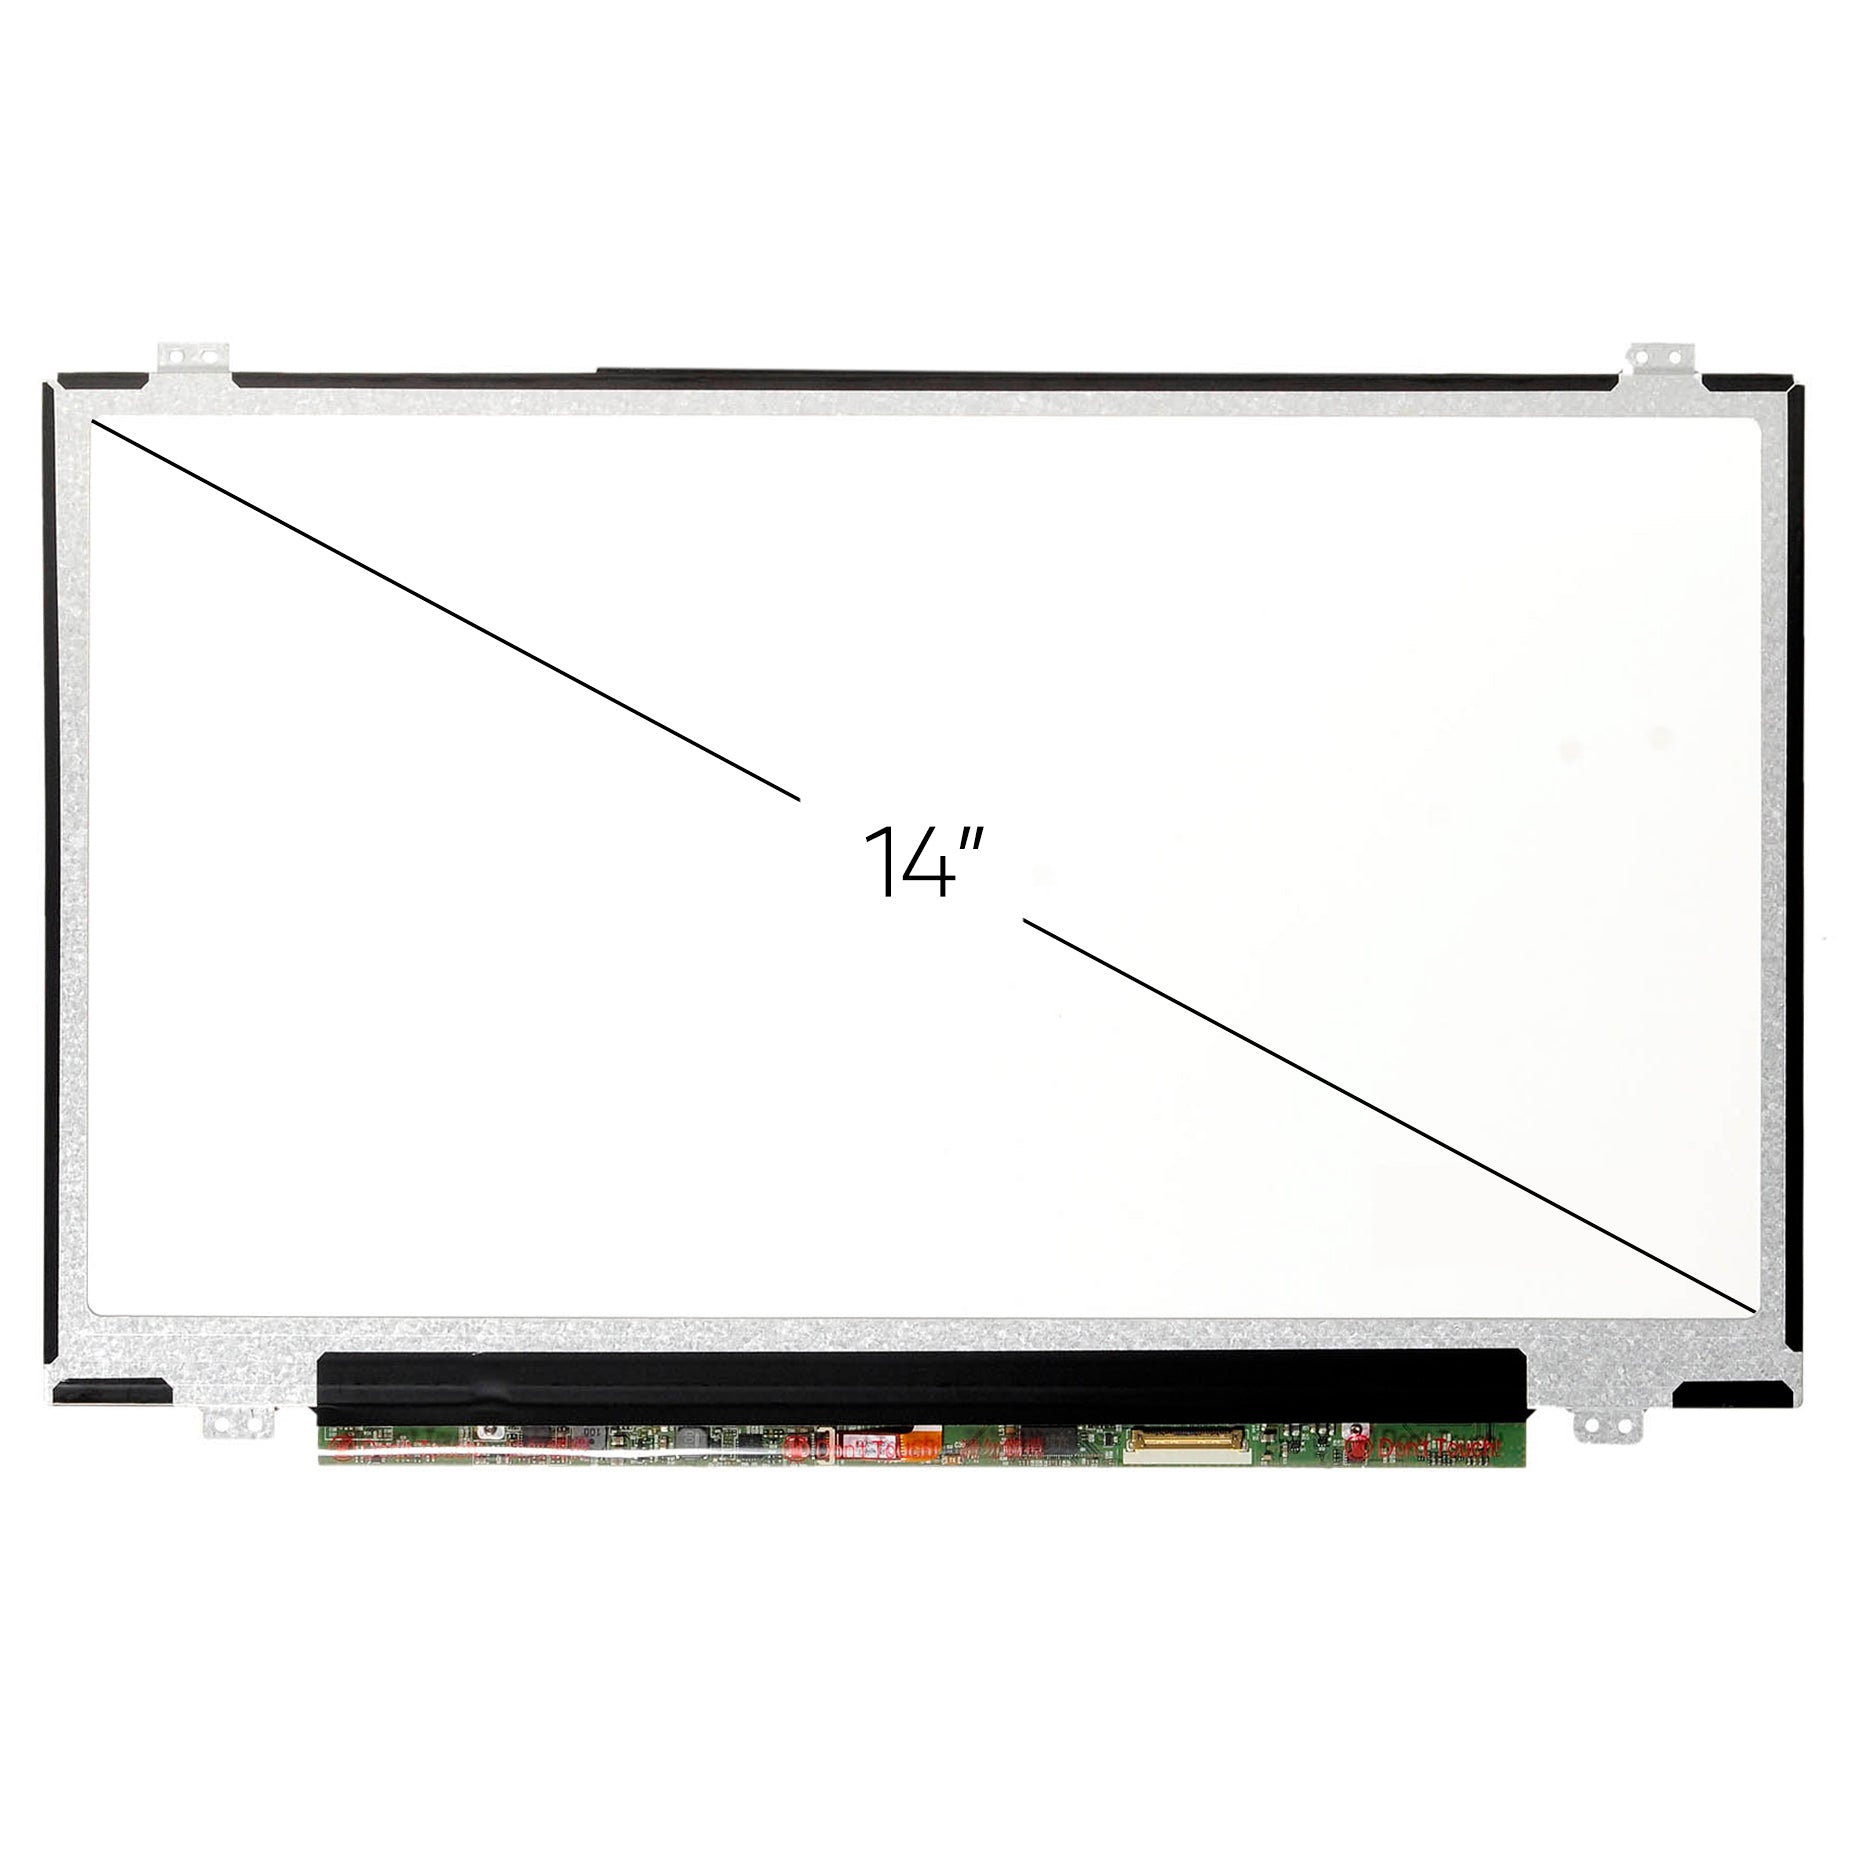 Screen Replacement for HP Elitebook 1040 G3 FHD 1920x1080 IPS Matte LCD LED Display